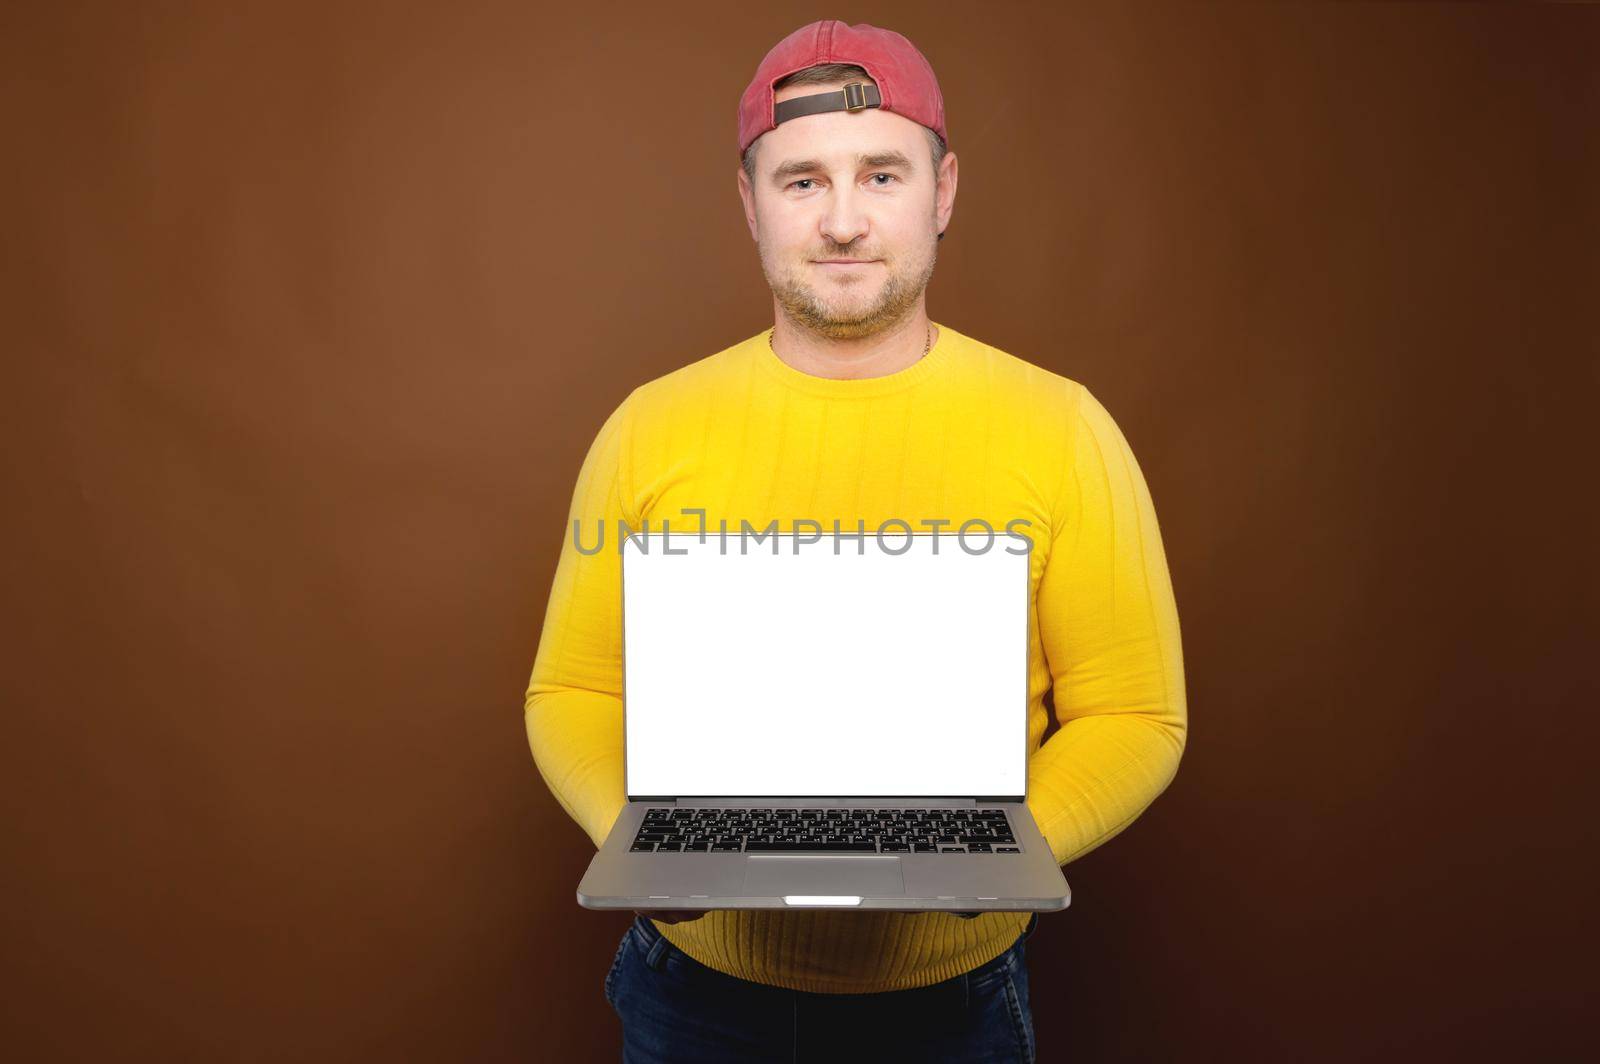 Studio portrait of a casual plump man in a yellow sweater and cap holding an open laptop with a white cut-out screen in his hands. Website presentation or application copy space.